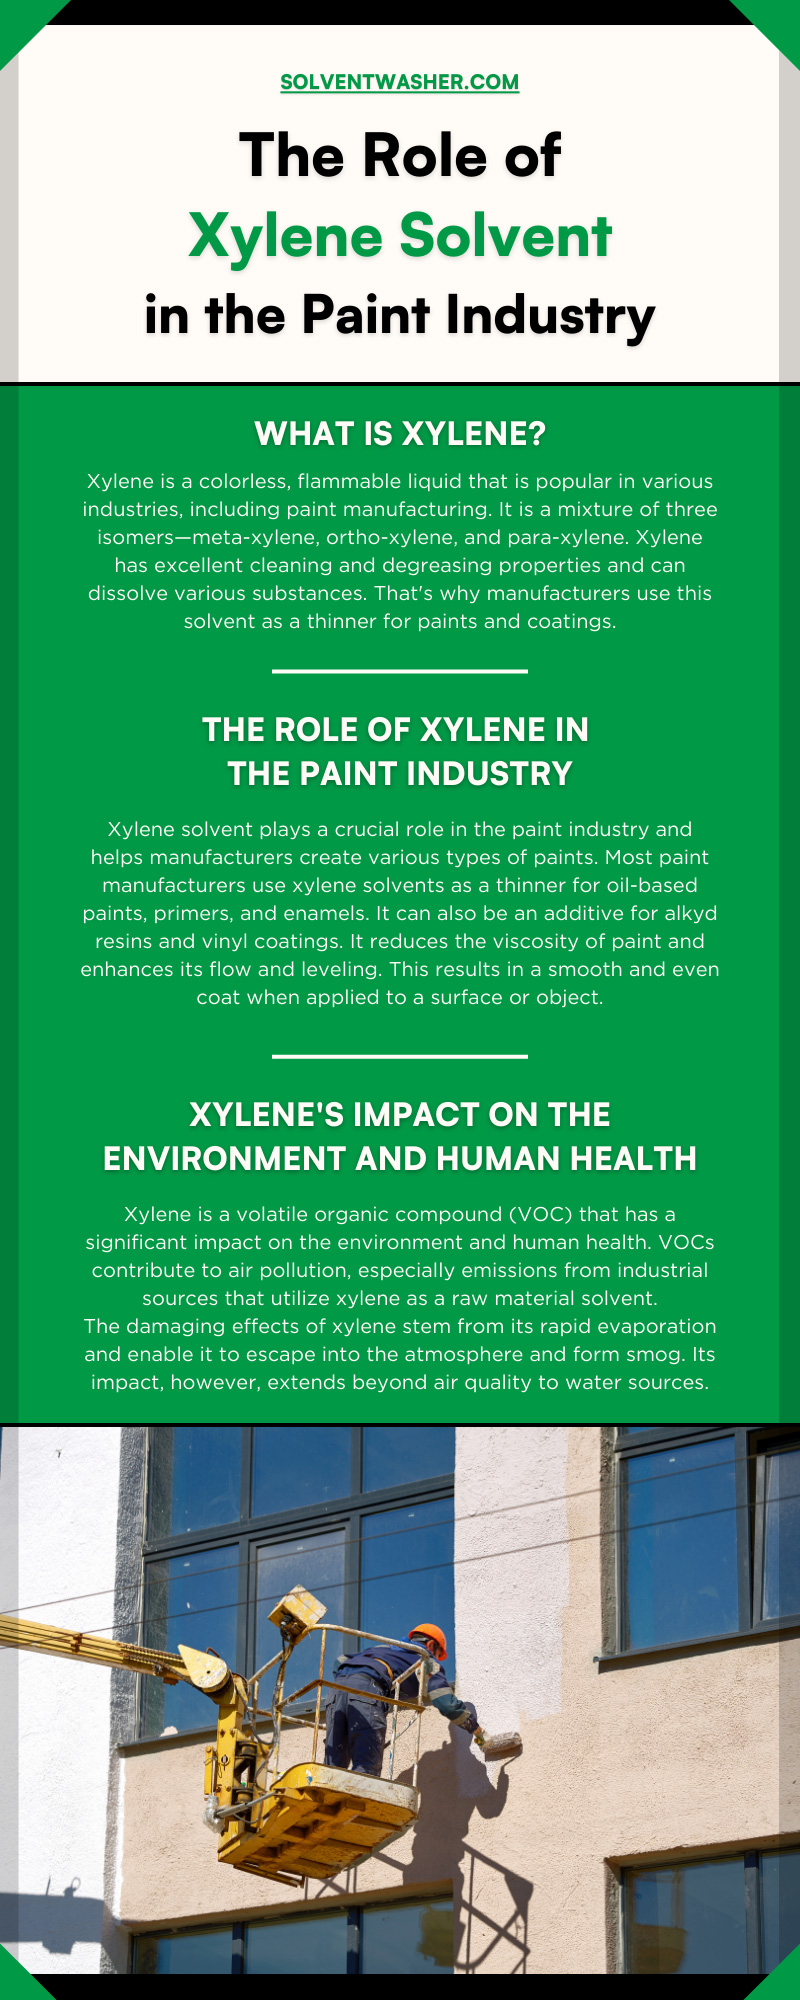 The Role of Xylene Solvent in the Paint Industry